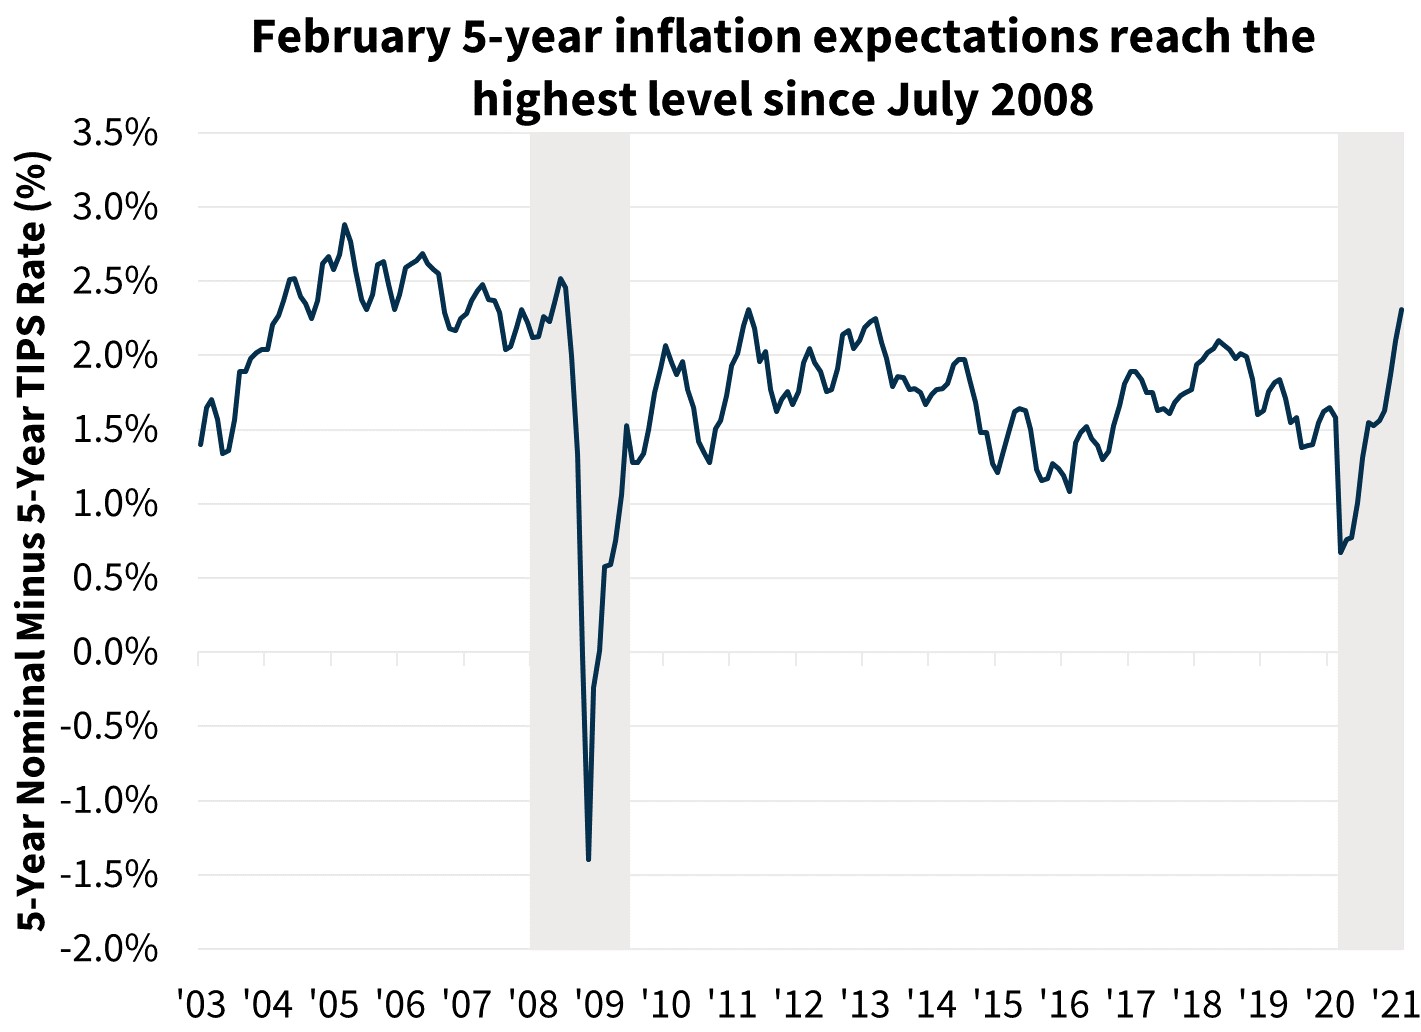  February 5-year inflation expectations reach the highest level since July 2008